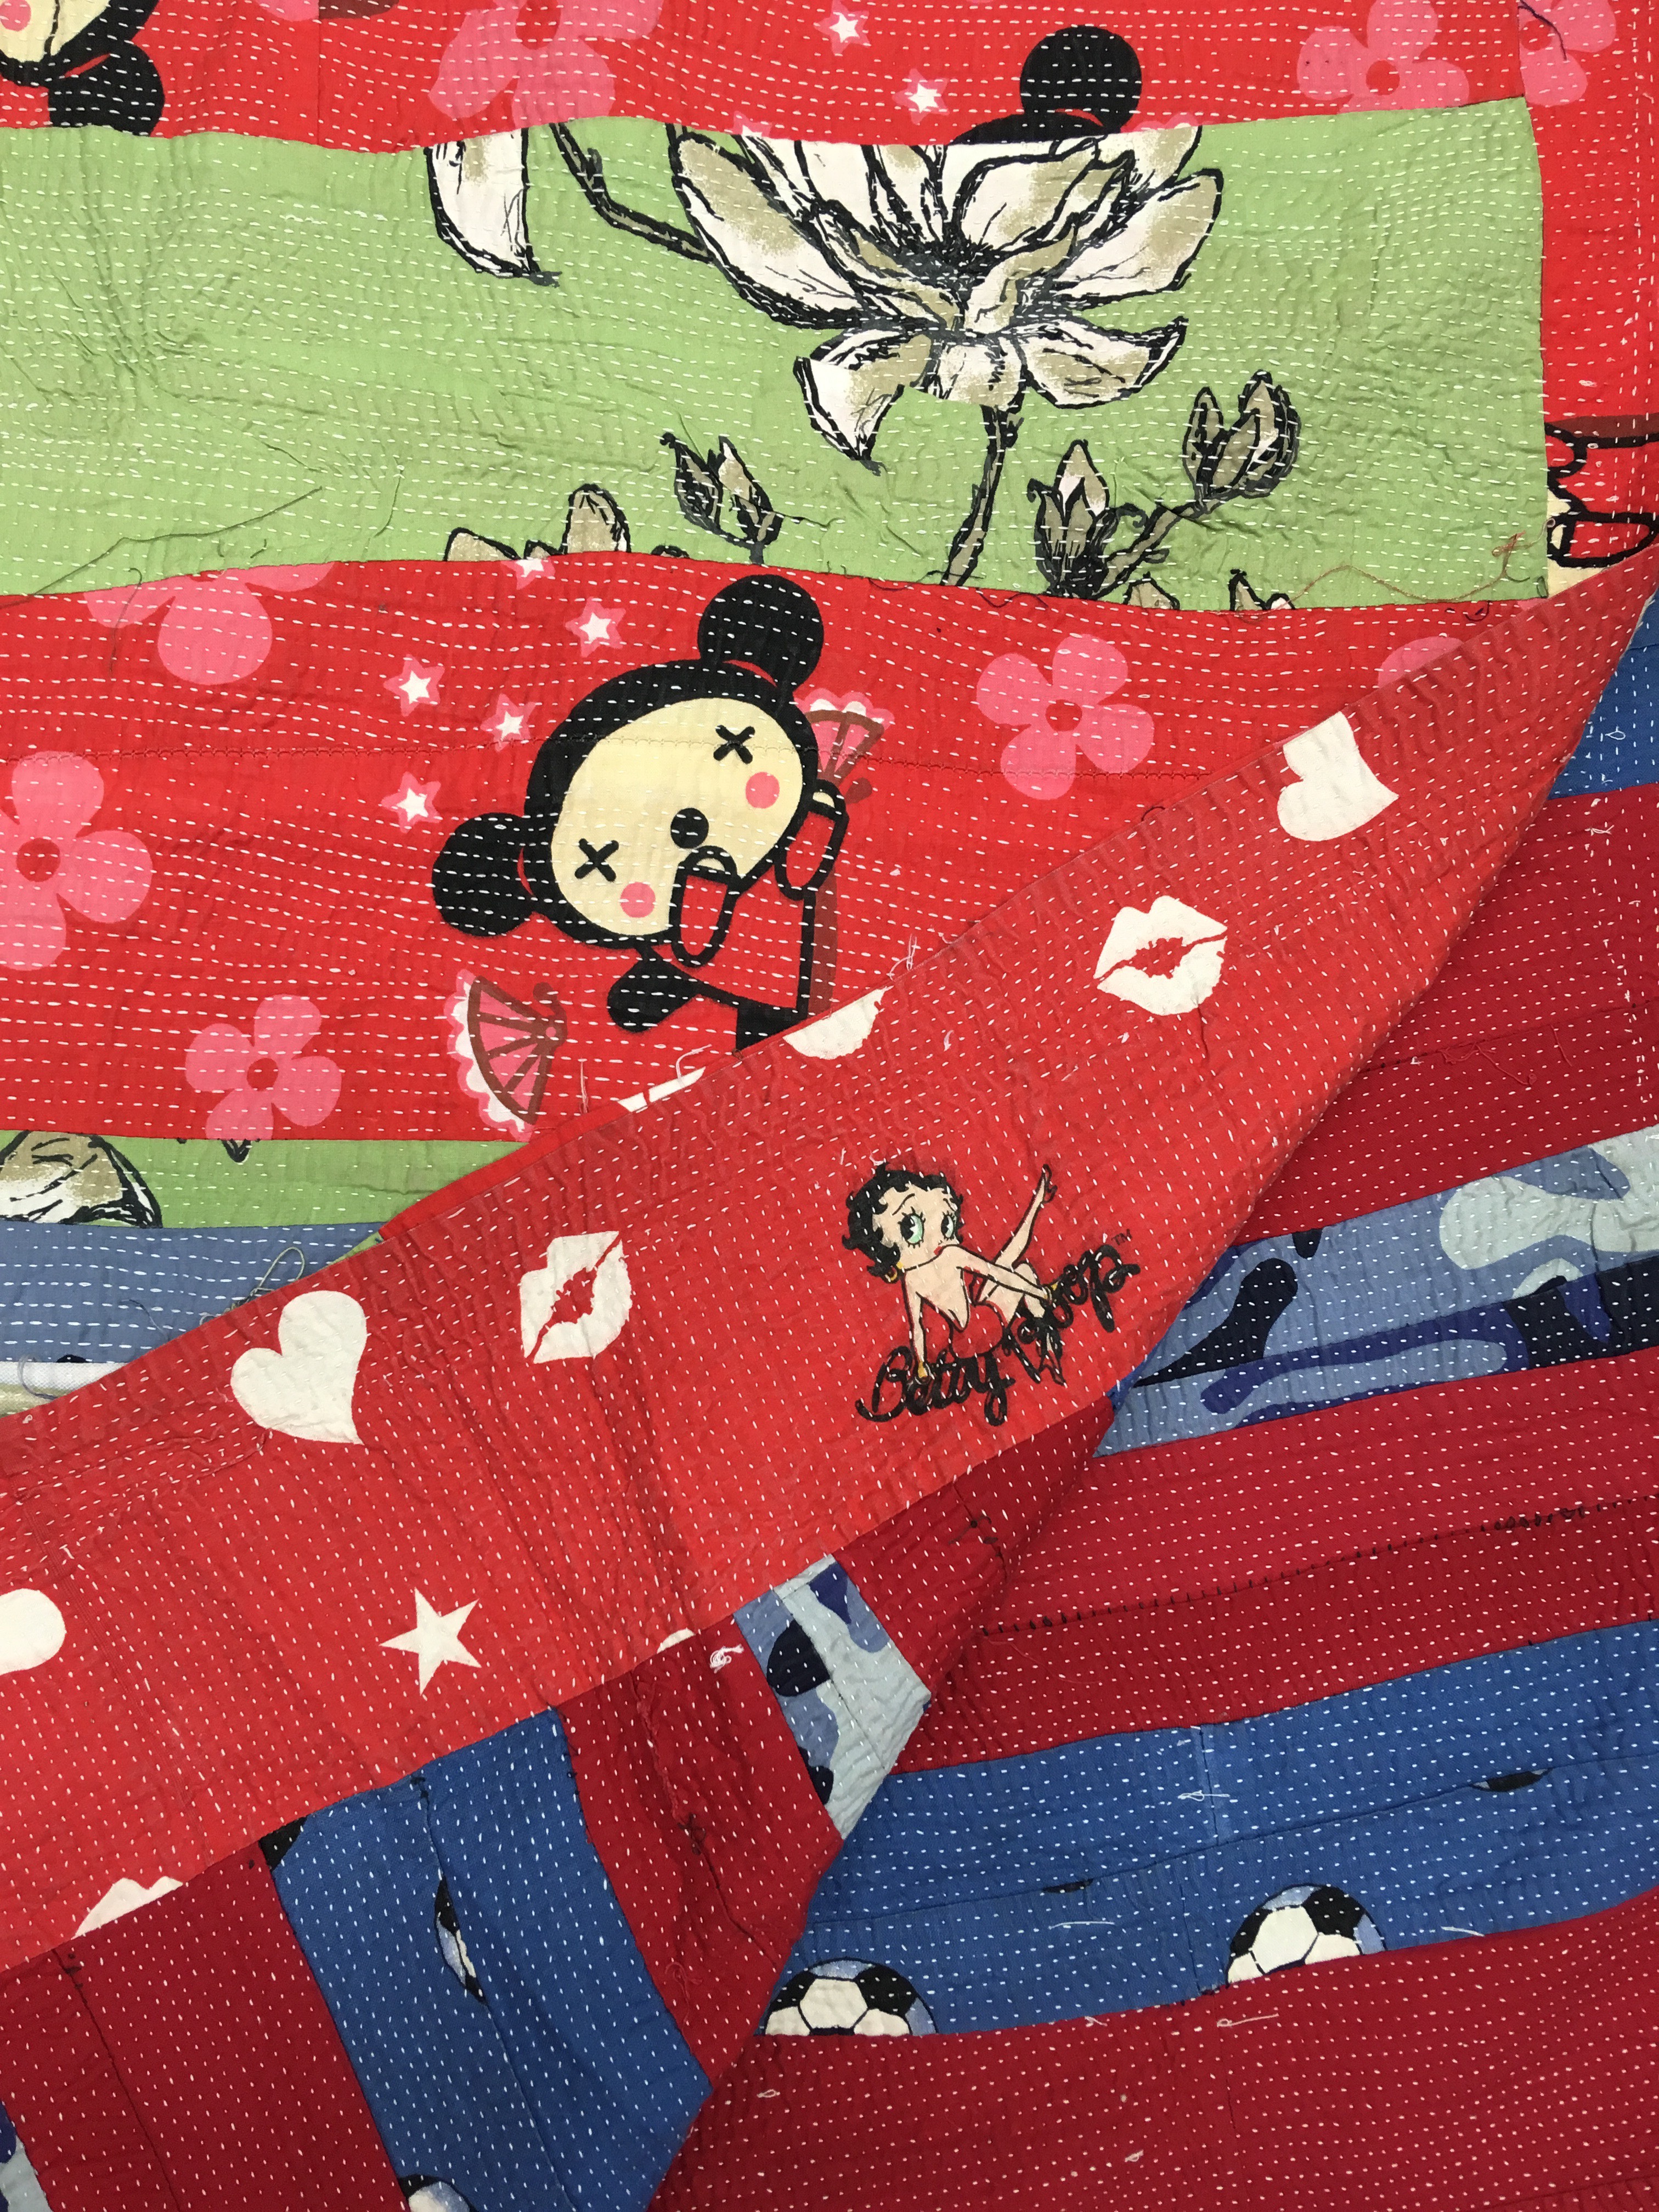 Red Blue Green Football/Pucca cartoon Patchwork